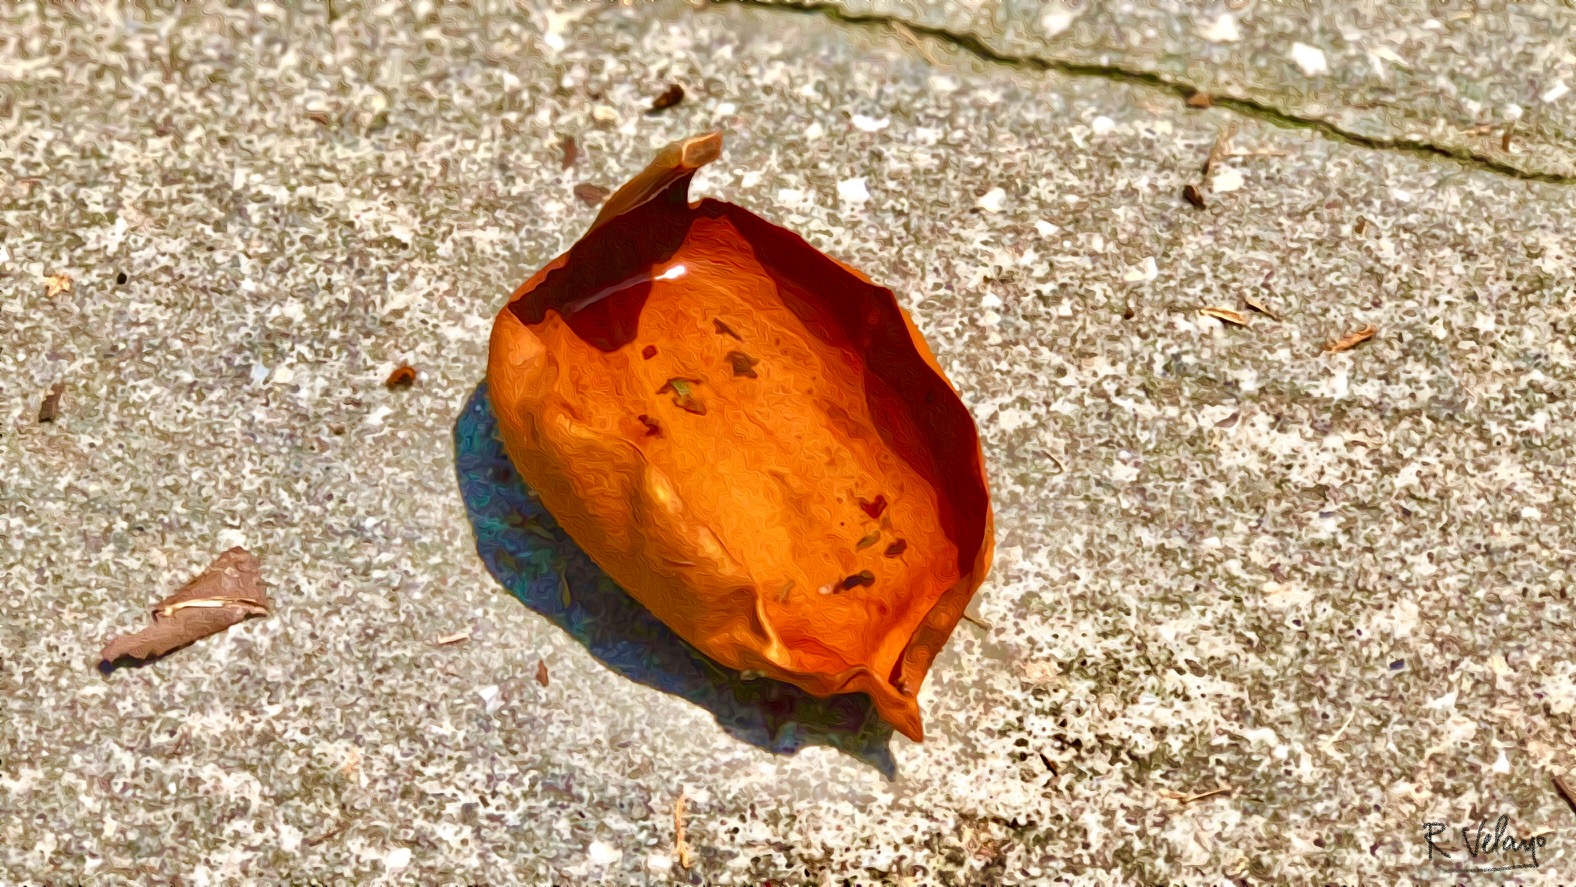 "DEAD LEAF FILLED WITH WATER 2" [Created: 9/08/2021]